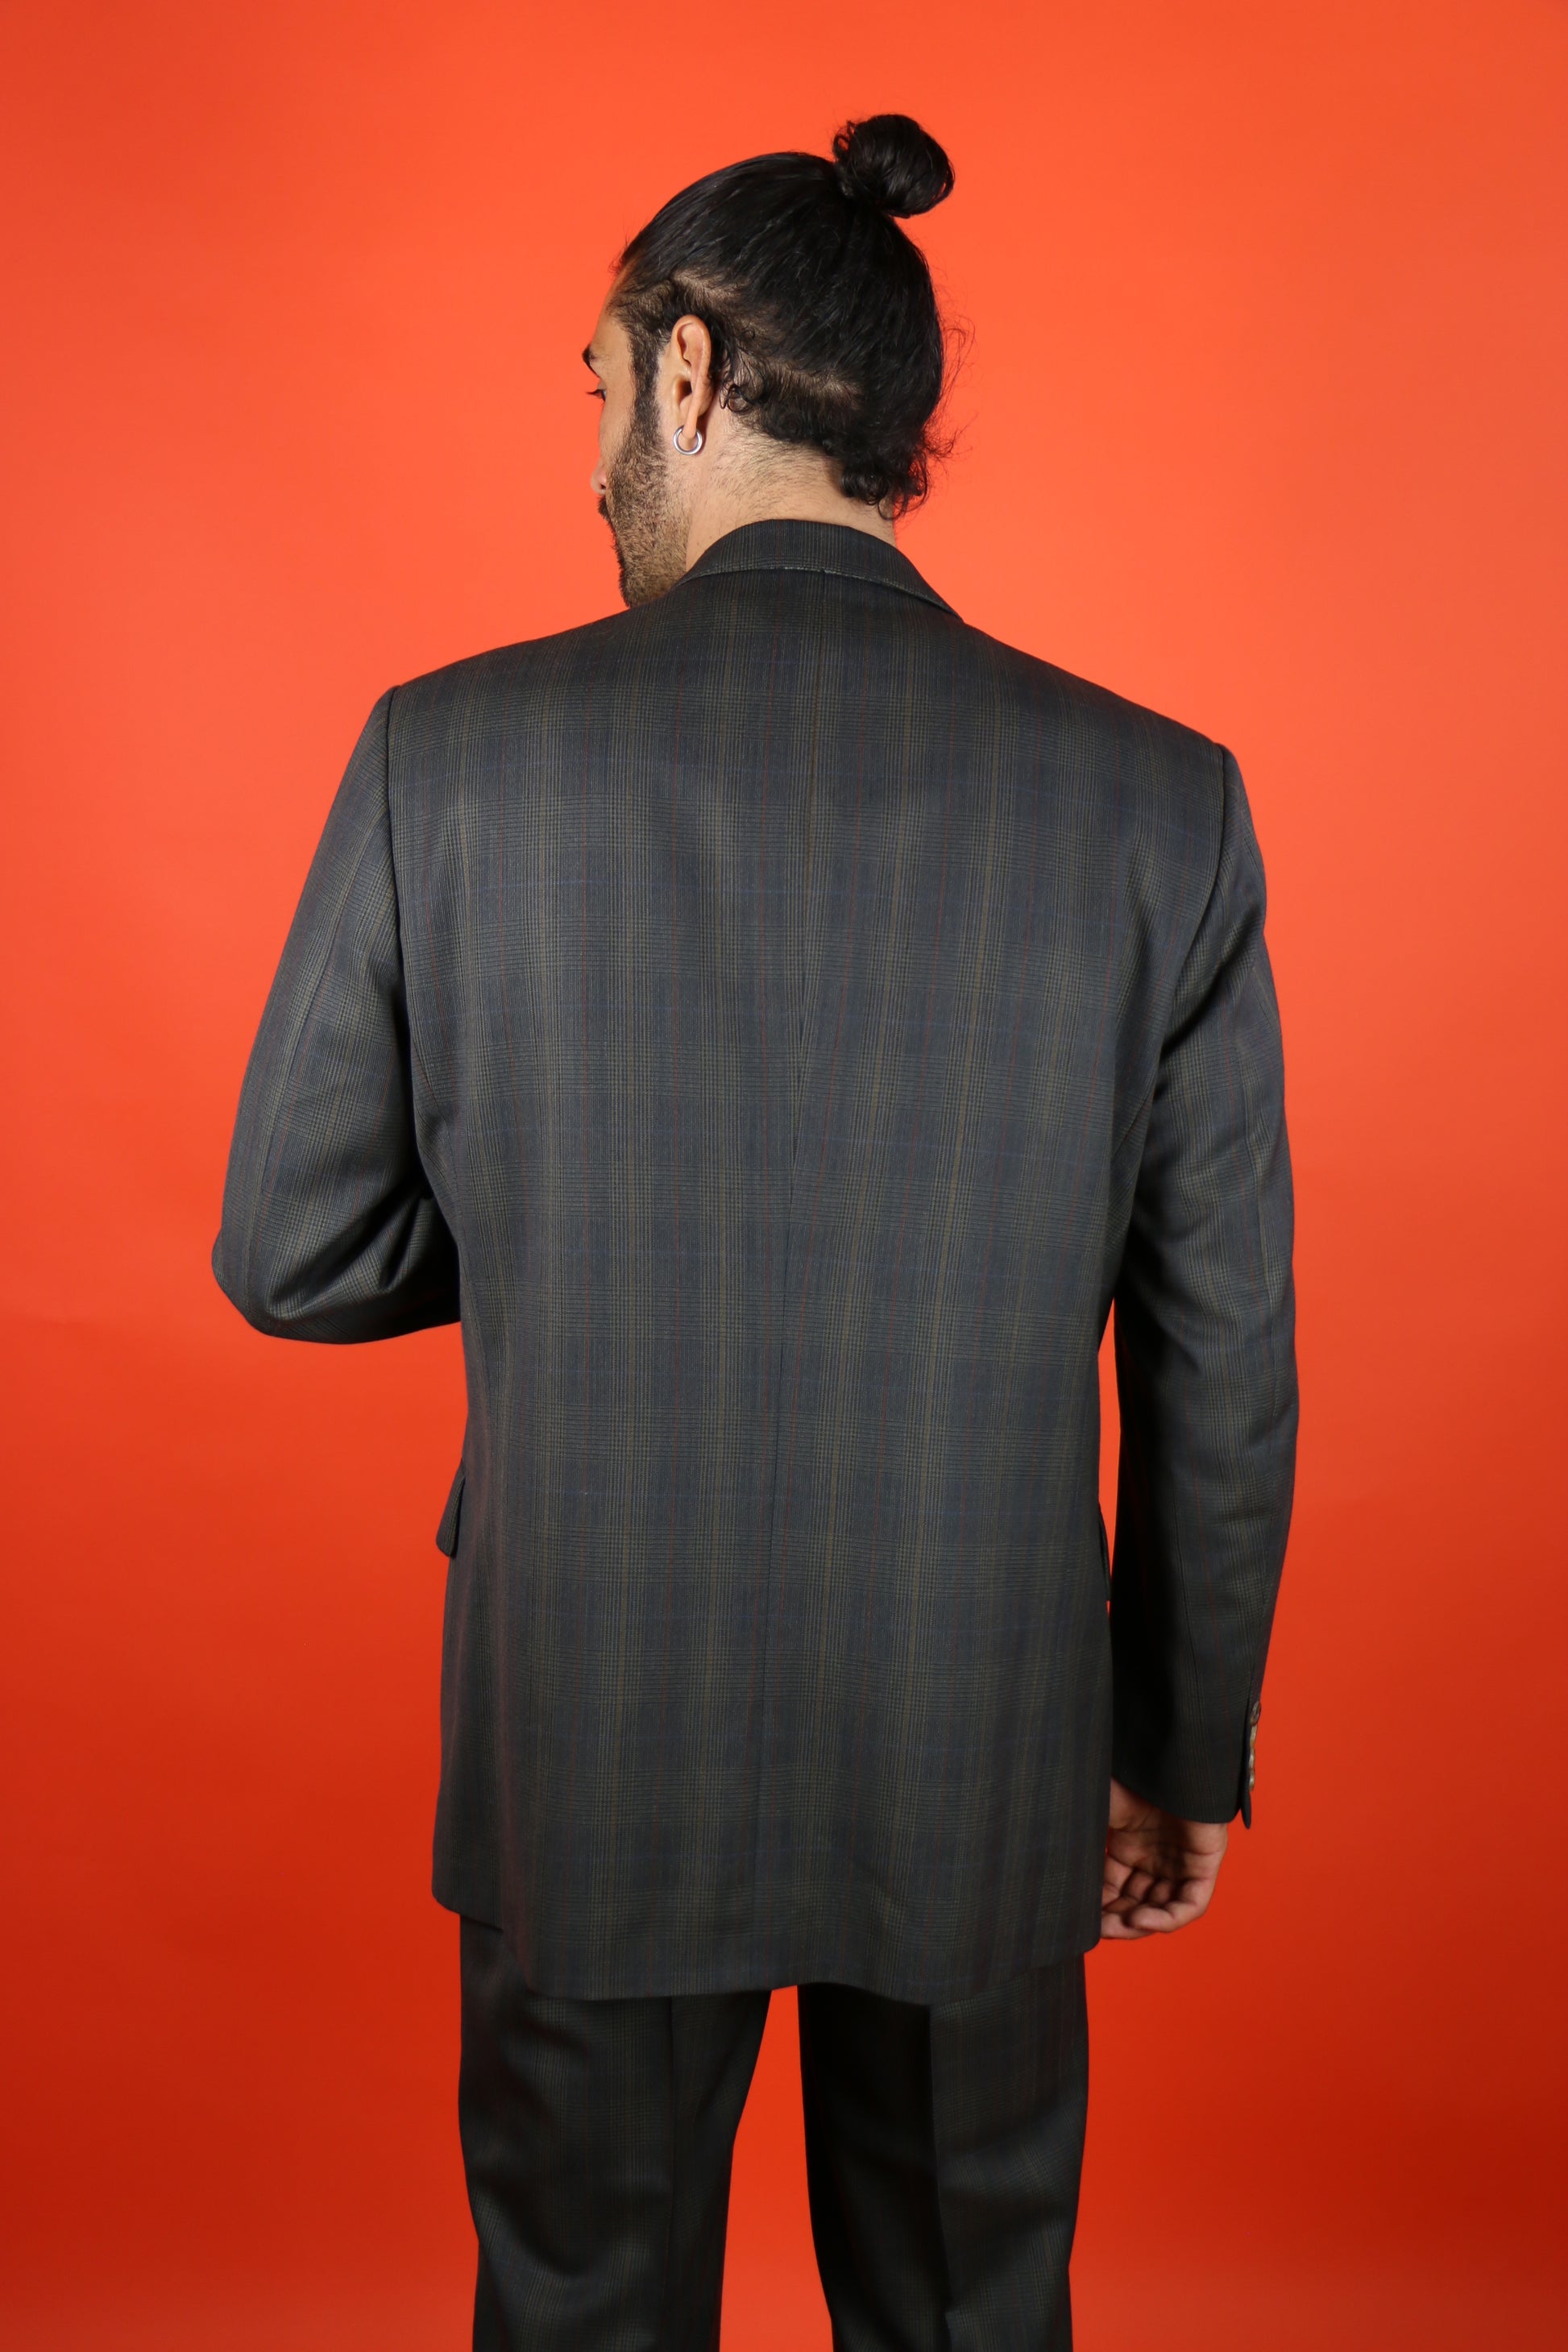 Burberrys' Double Breasted Check Suit - vintage clothing clochard92.com